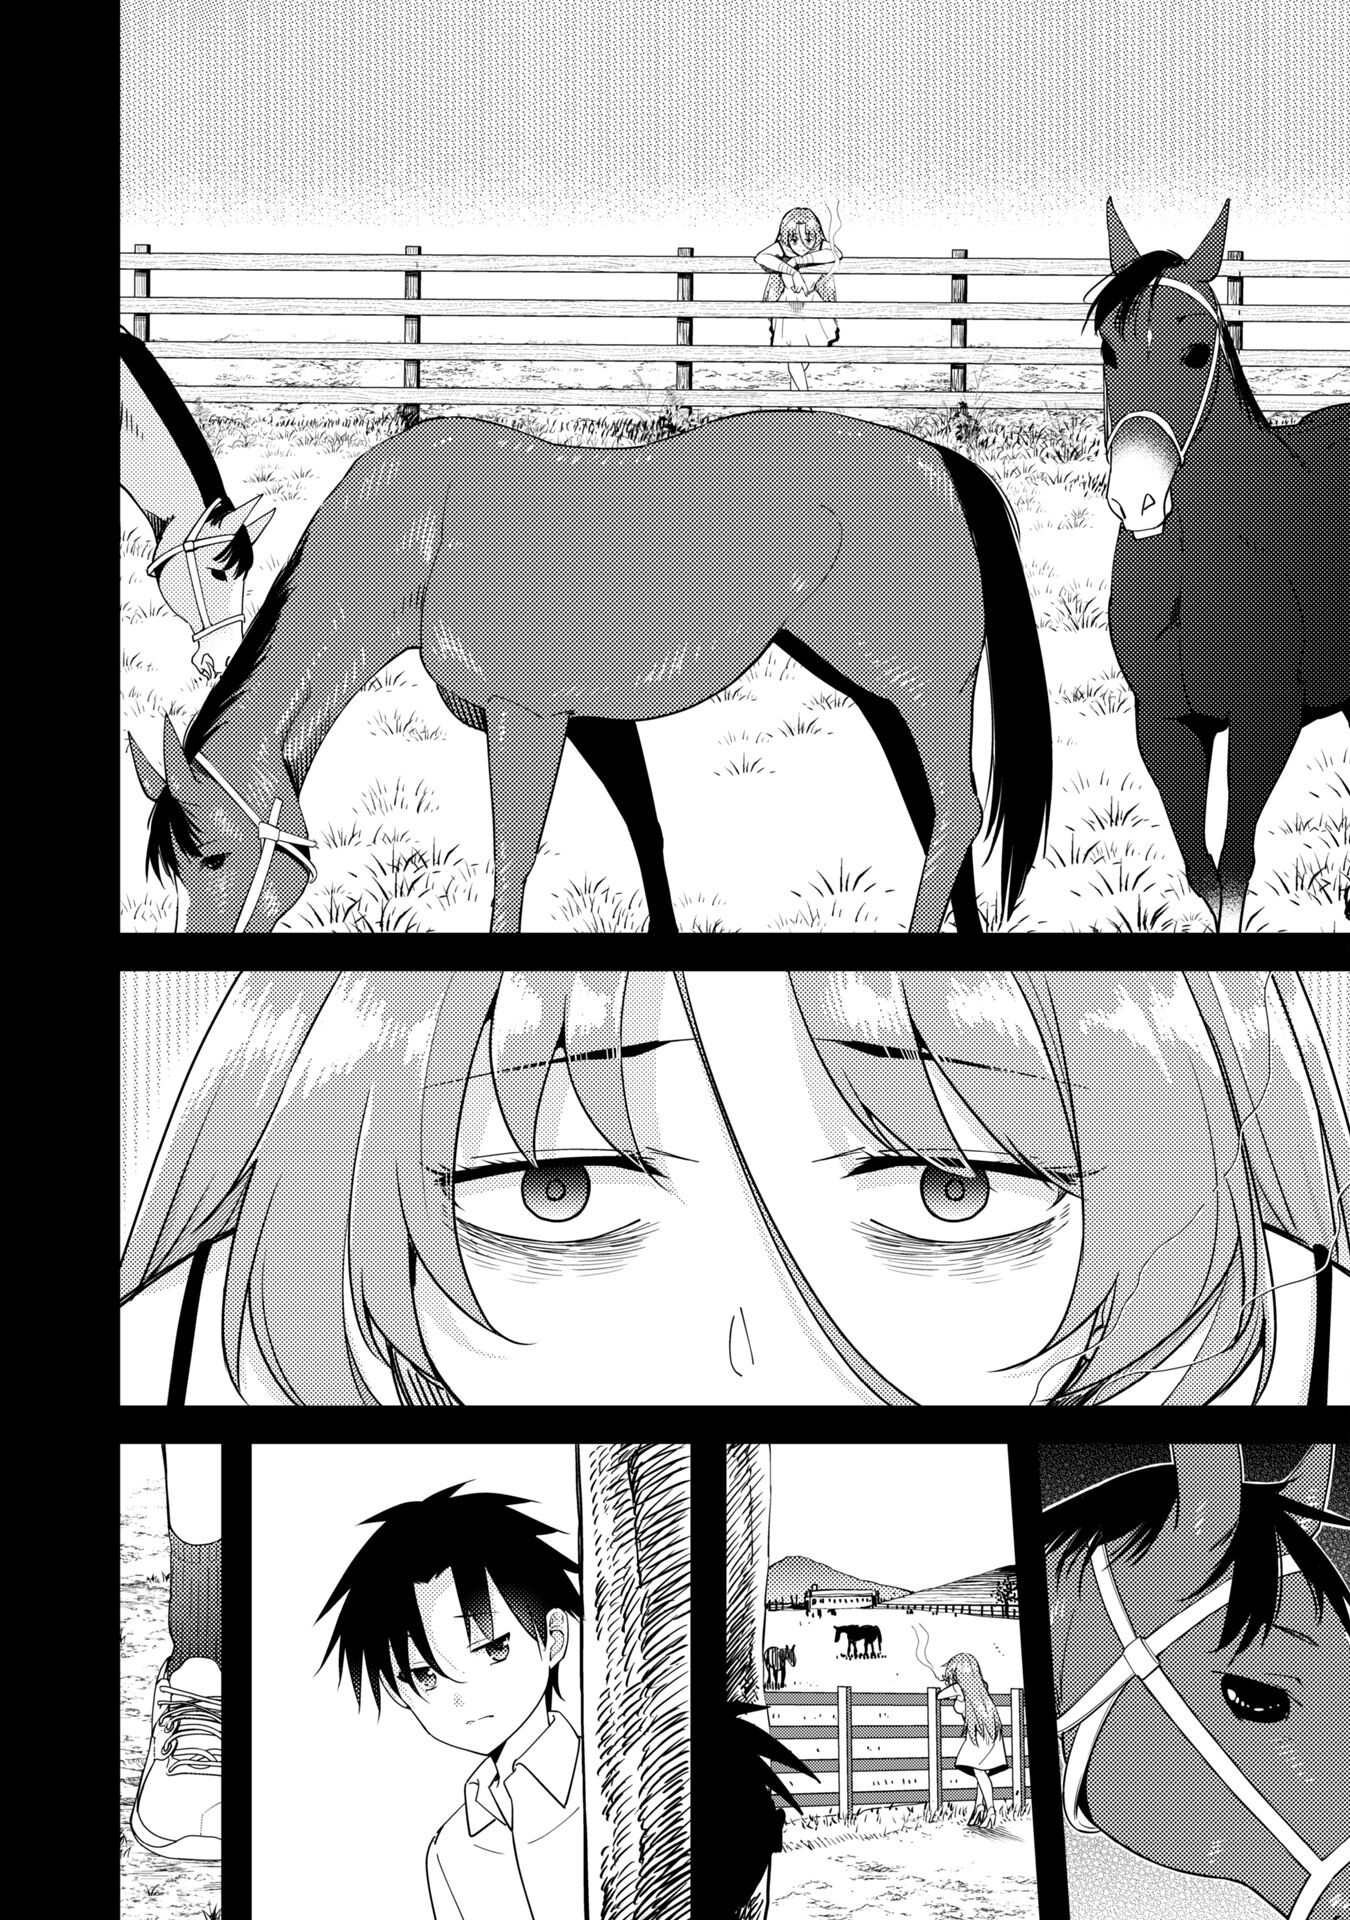 Reincarnated As a Racehorse - Chapter 38 - Page 22